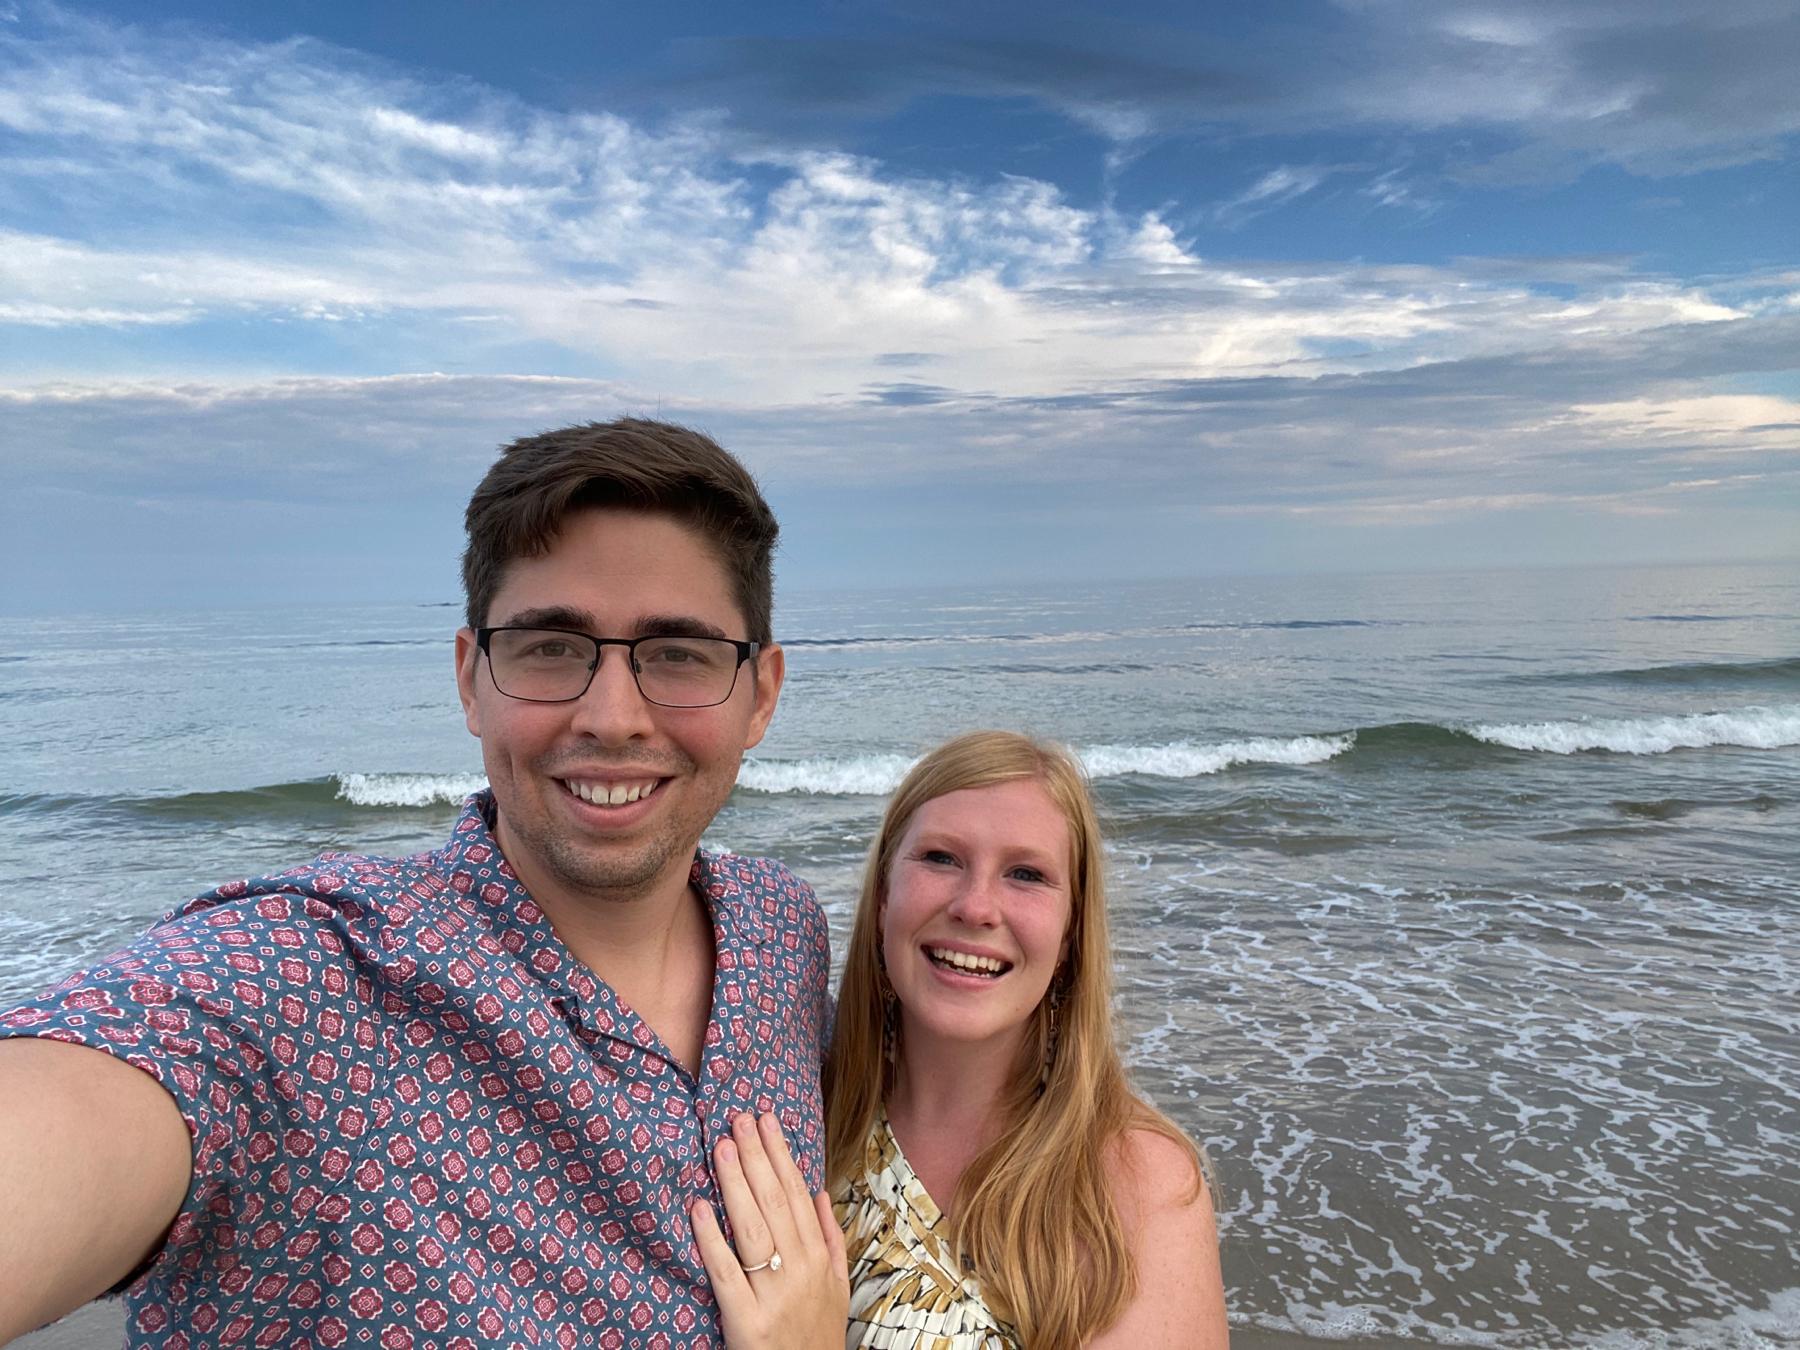 Newly engaged!! Parson’s Beach, Kennebunk, ME (August 5th, 2022)